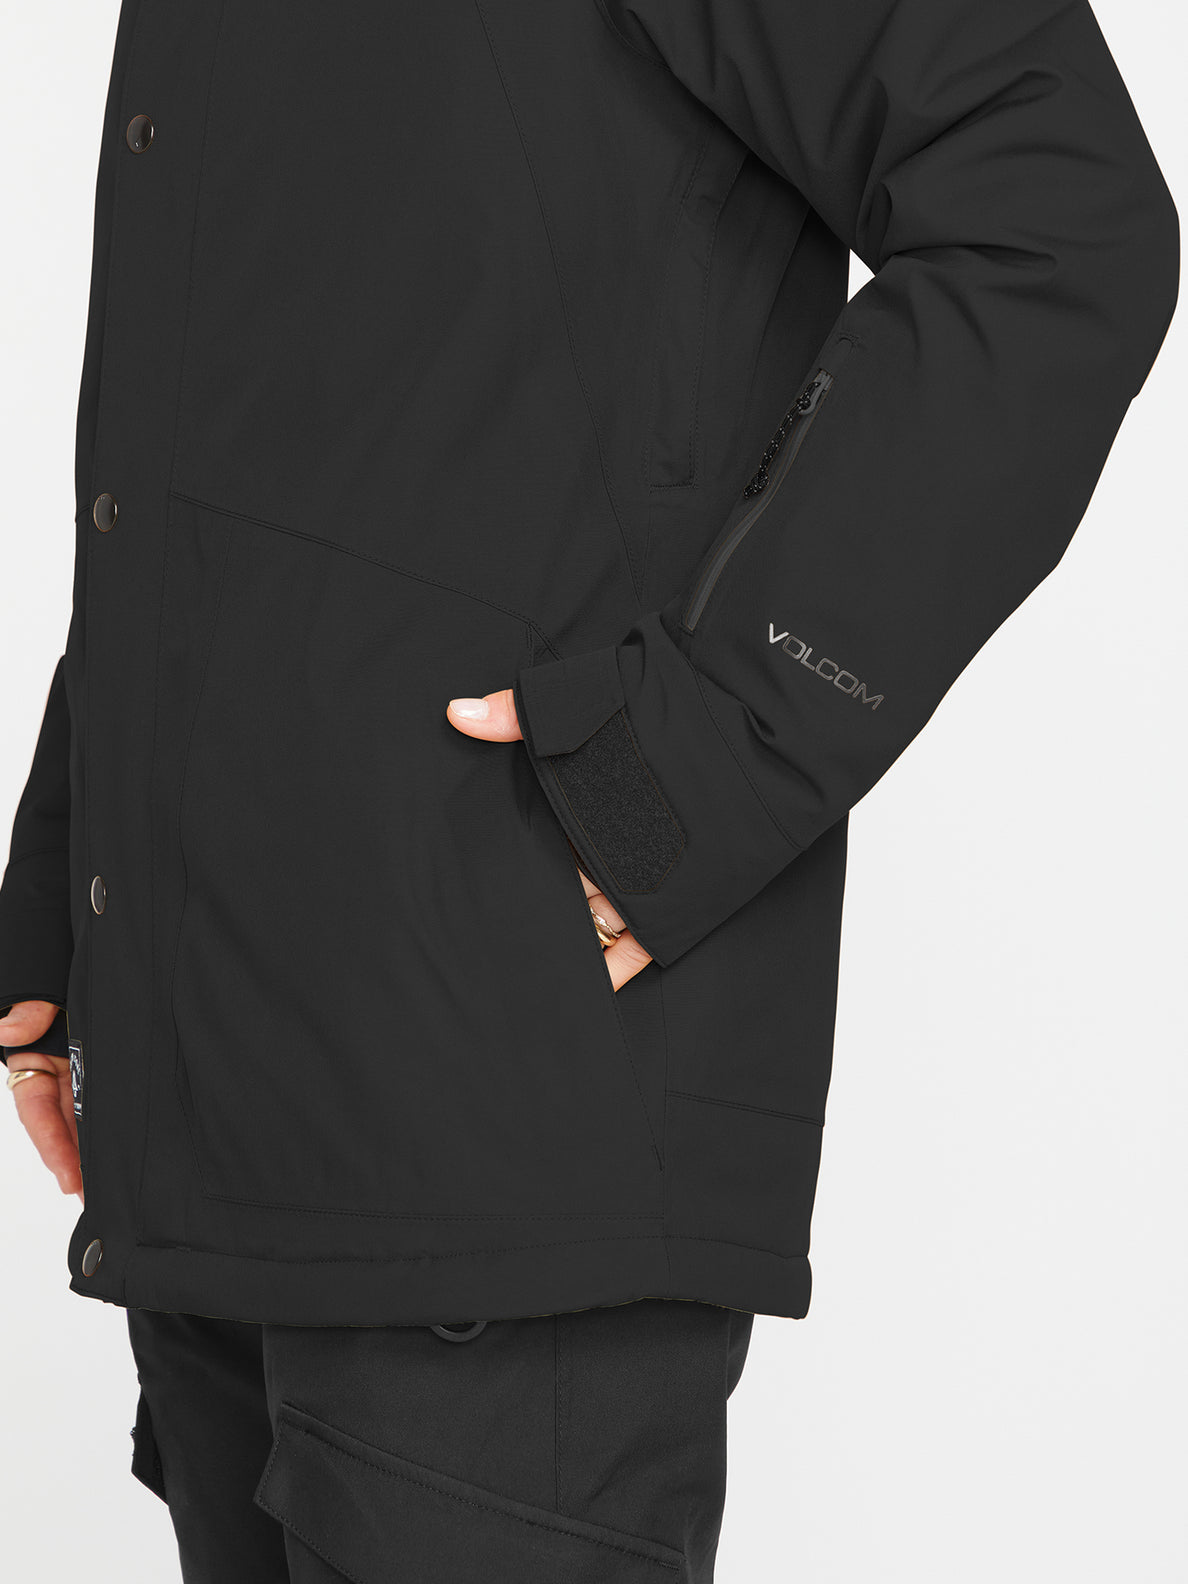 Womens Ell Insulated Gore-Tex Jacket - Black (H0452302_BLK) [7]